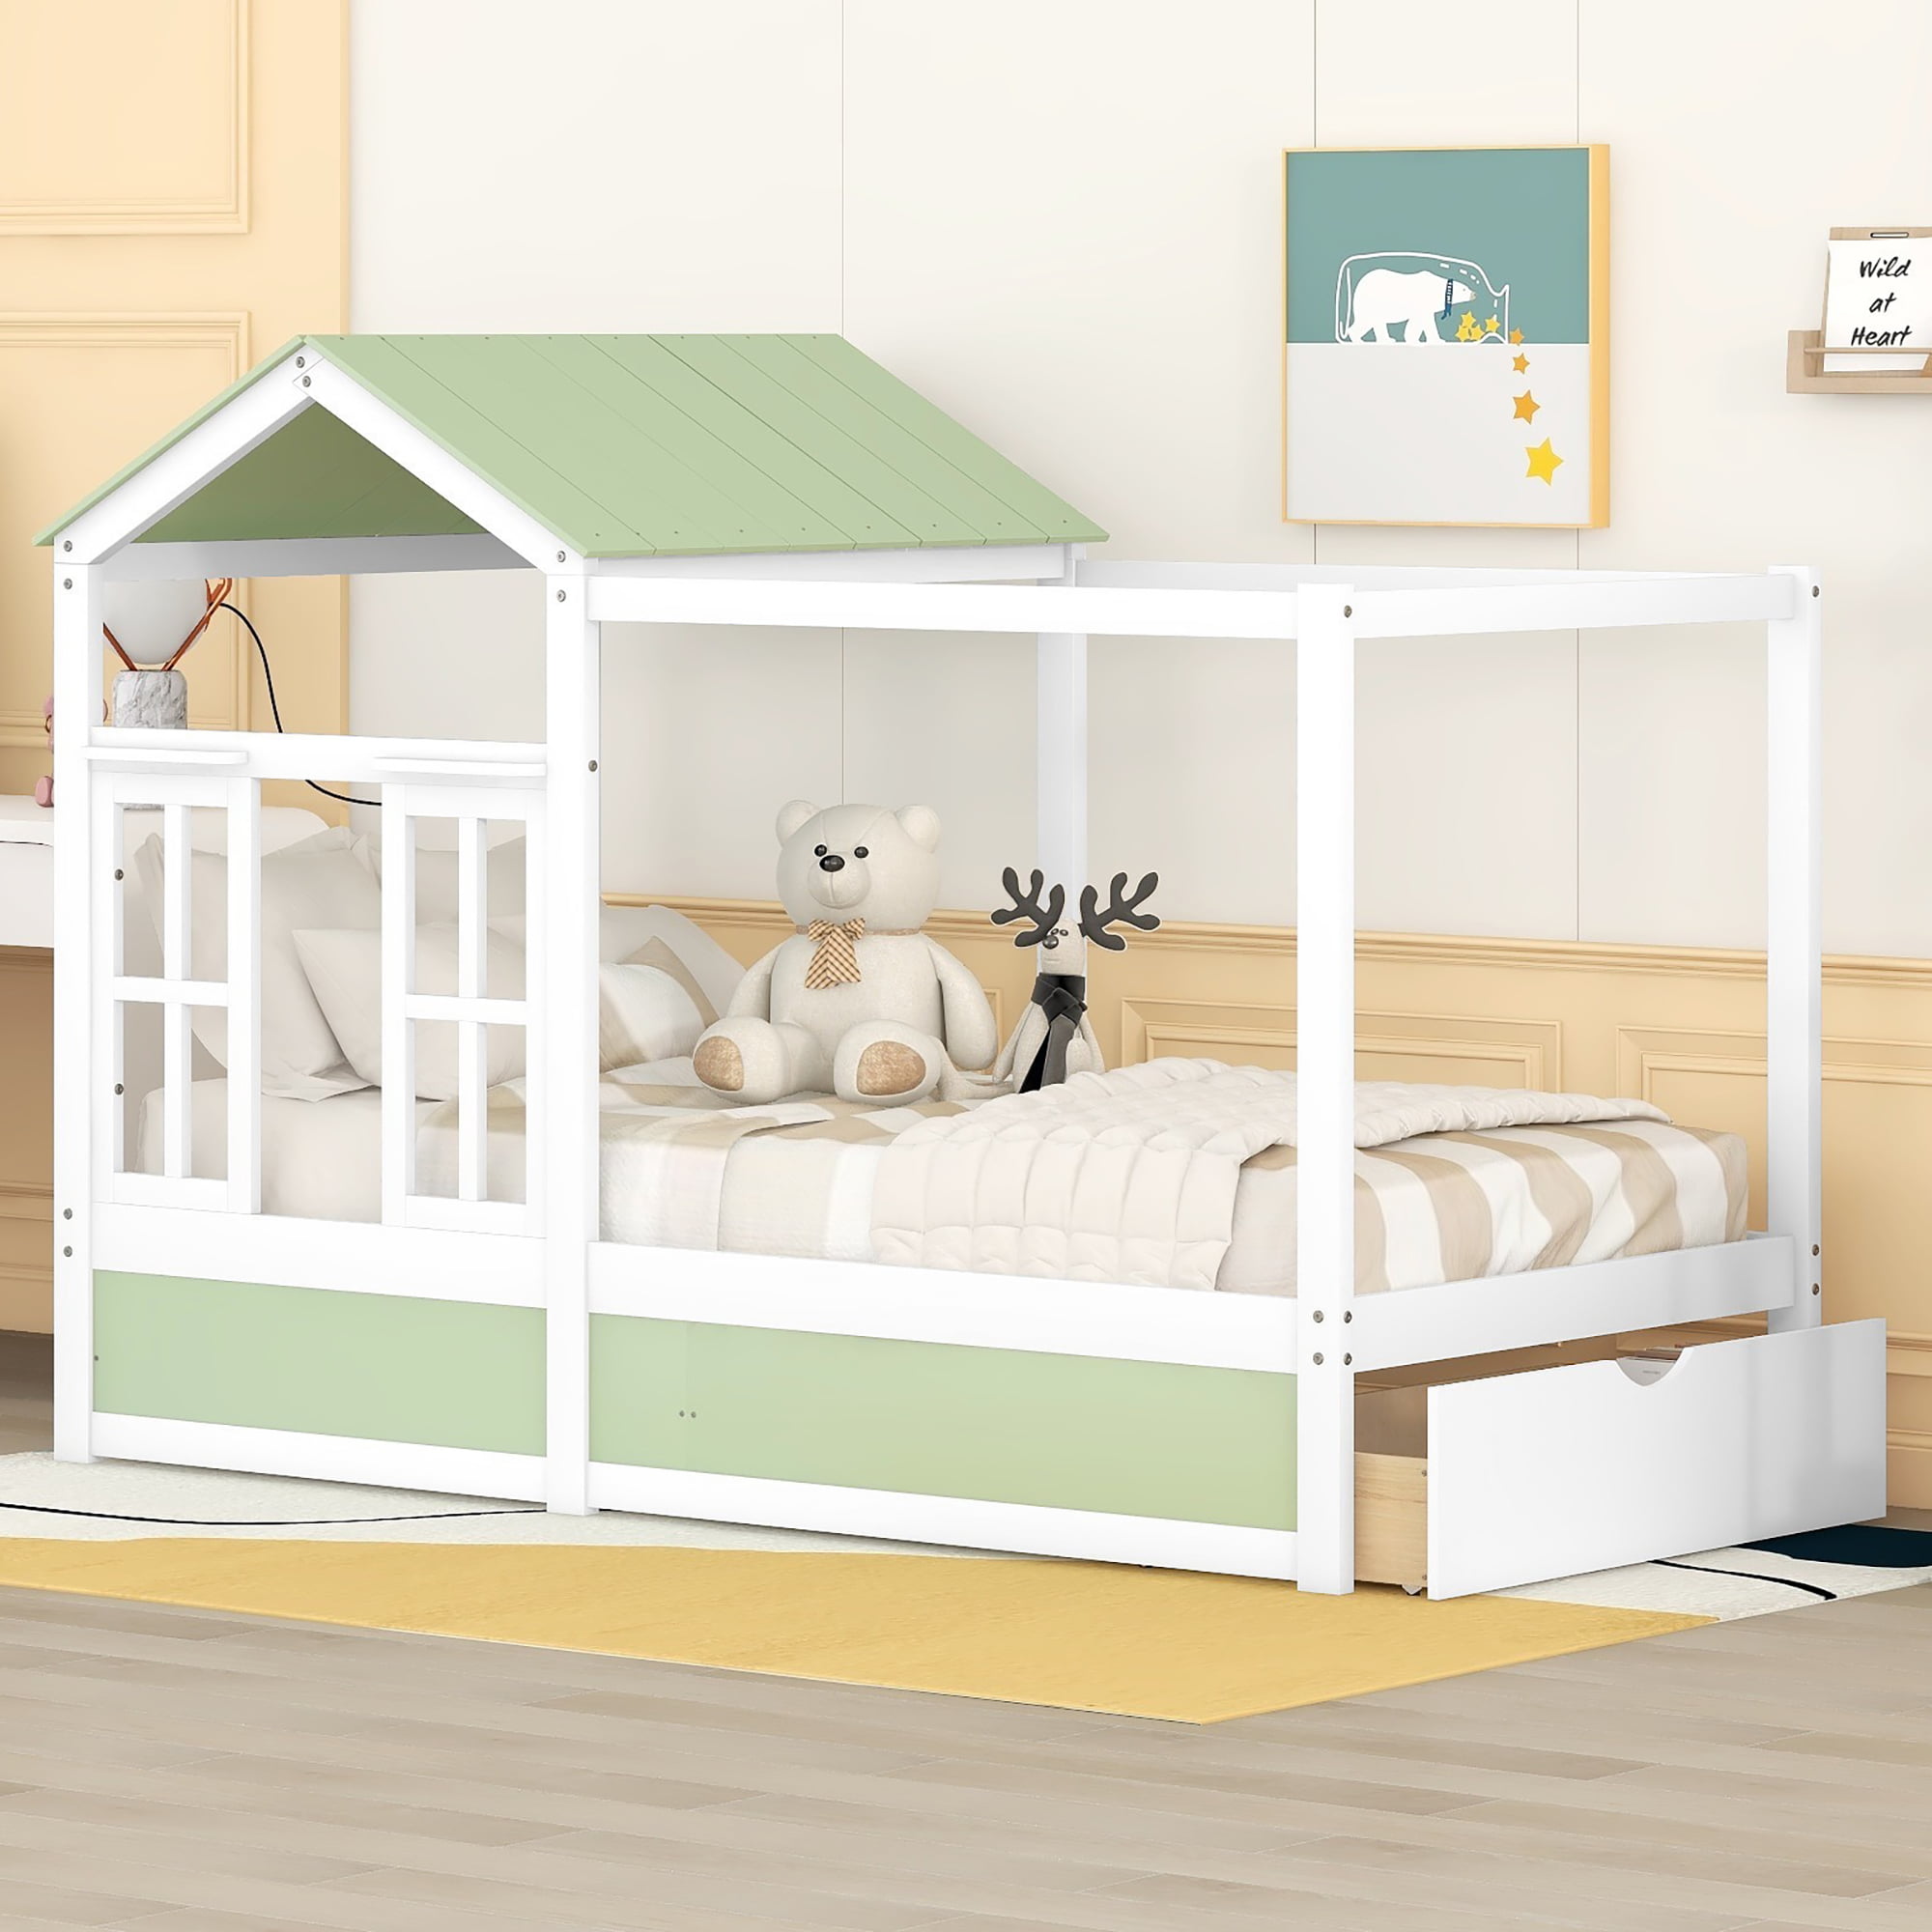 Twin Size House Bed With Roof, Window And Drawer